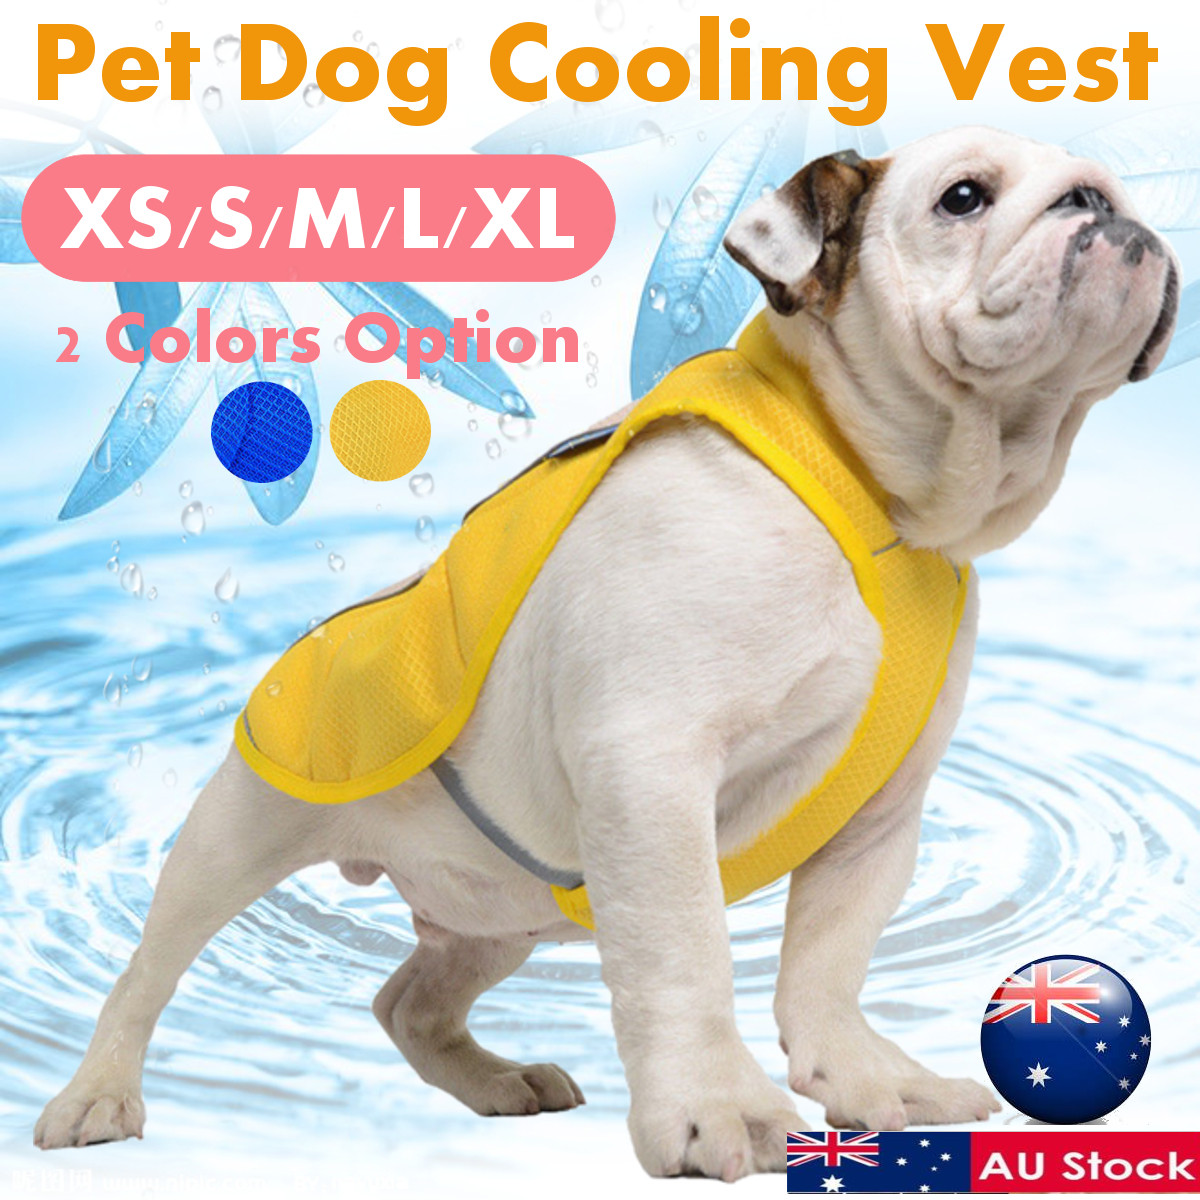 Summer-Pet-Dog-Cooling-Vest--Coat---Cool-Down-your-Dog-in-Hot-Weather-1963221-4